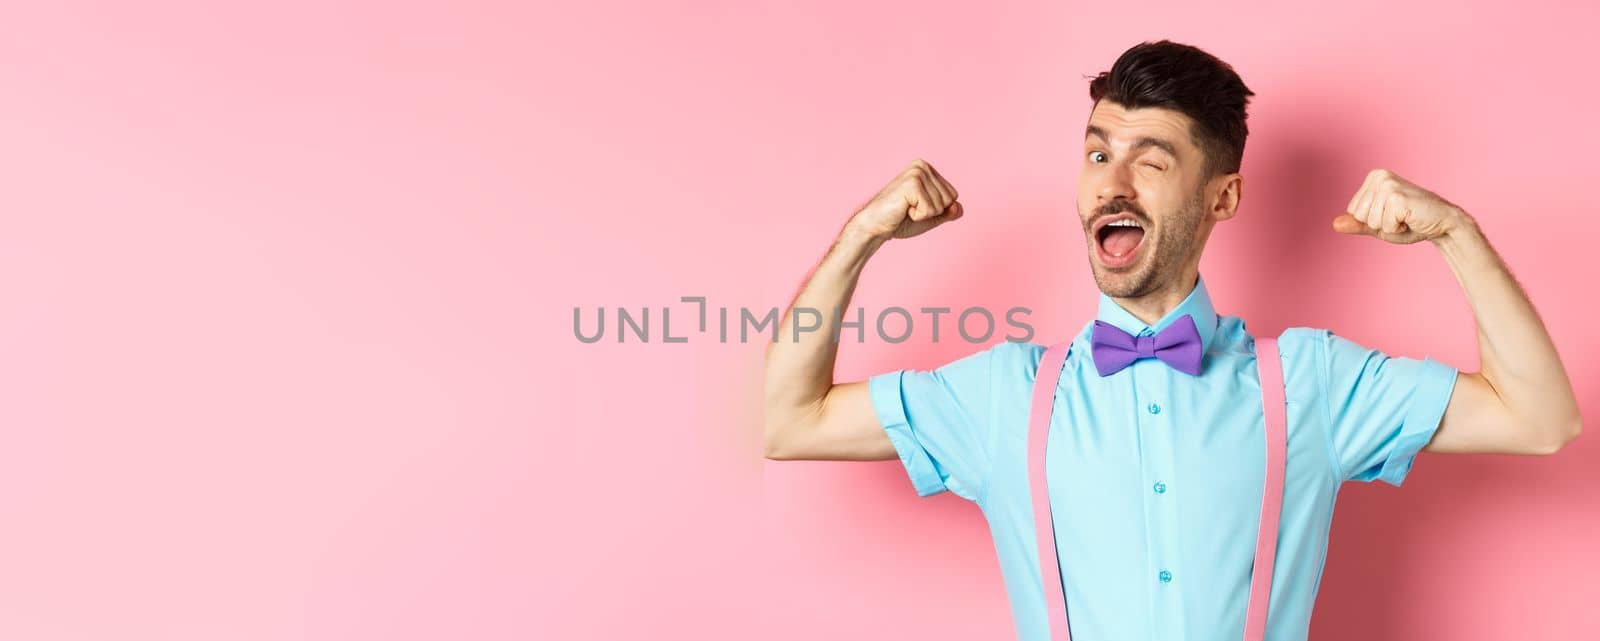 Strong and funny guy with french moustache, flexing biceps and winking at camera, show-off his strengths, standing over pink background.